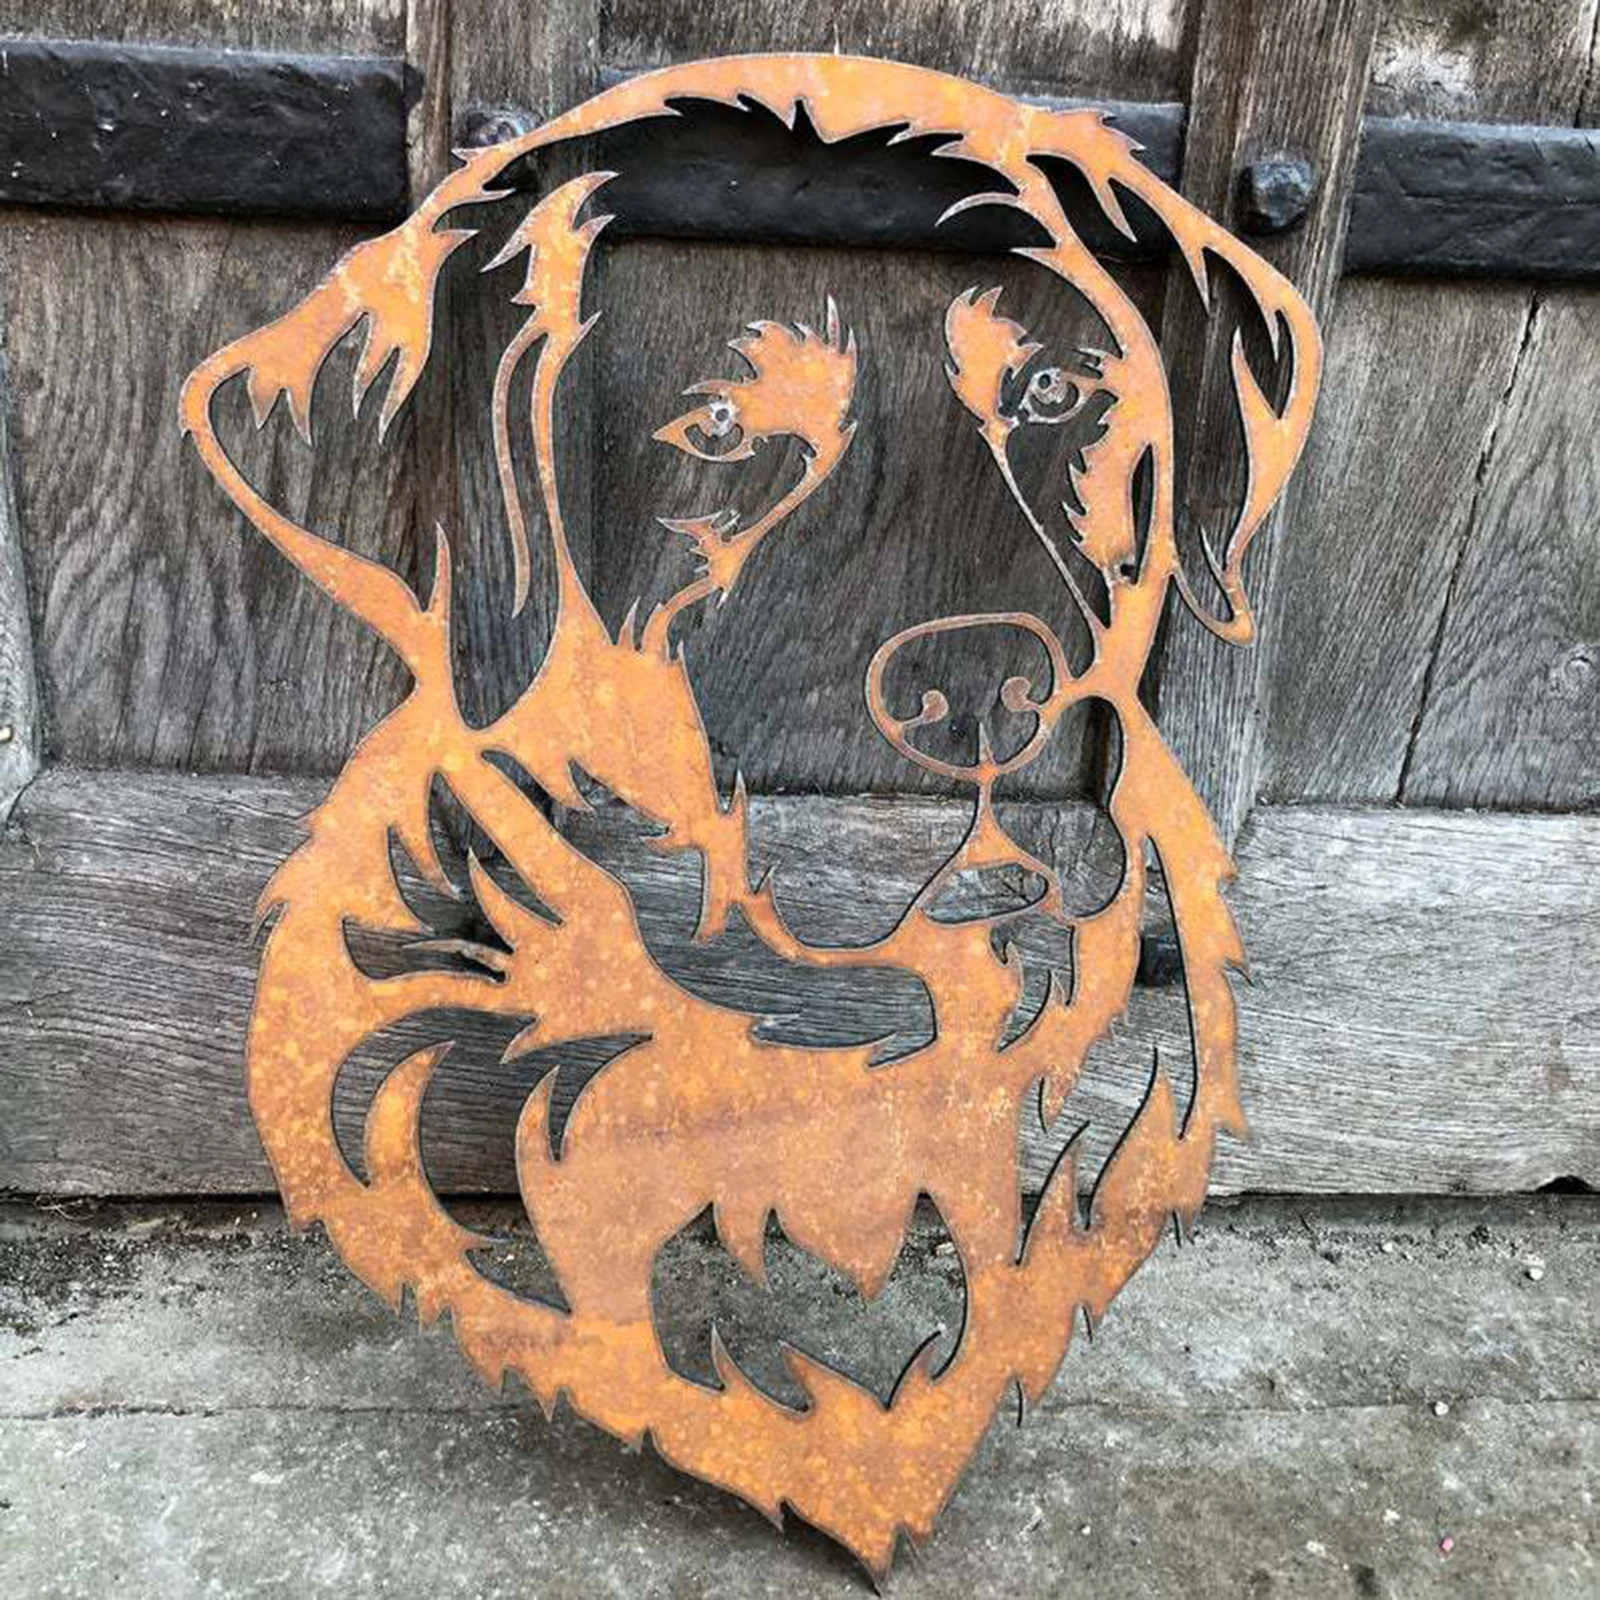 Cute Silhouette Steel Garden Dog Labrador Animal Decor Hollowed Out for Wall Fence Courtyard Decor House Outside Housewarming